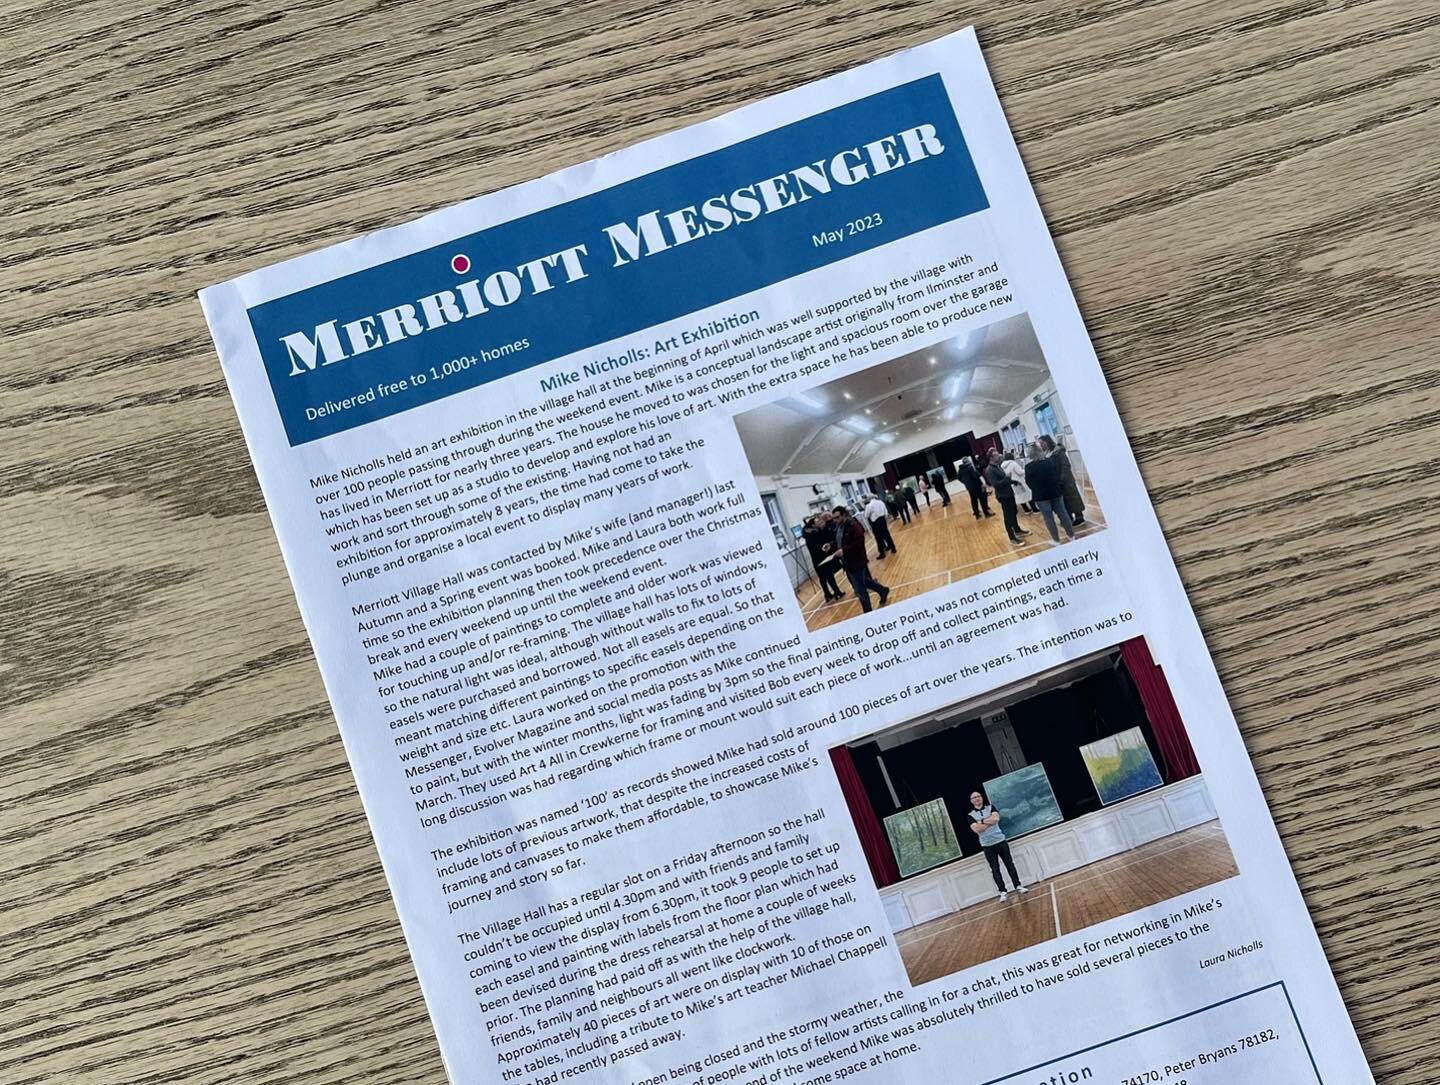 Apologies for the silence since the exhibition whilst I was struck down with a toothache 😫 
🎨
Deliveries now completed and winner of the prize draw has been notified. 
Also made the front page of the Merriott Messenger 👍 
🎨 
Results of the visito